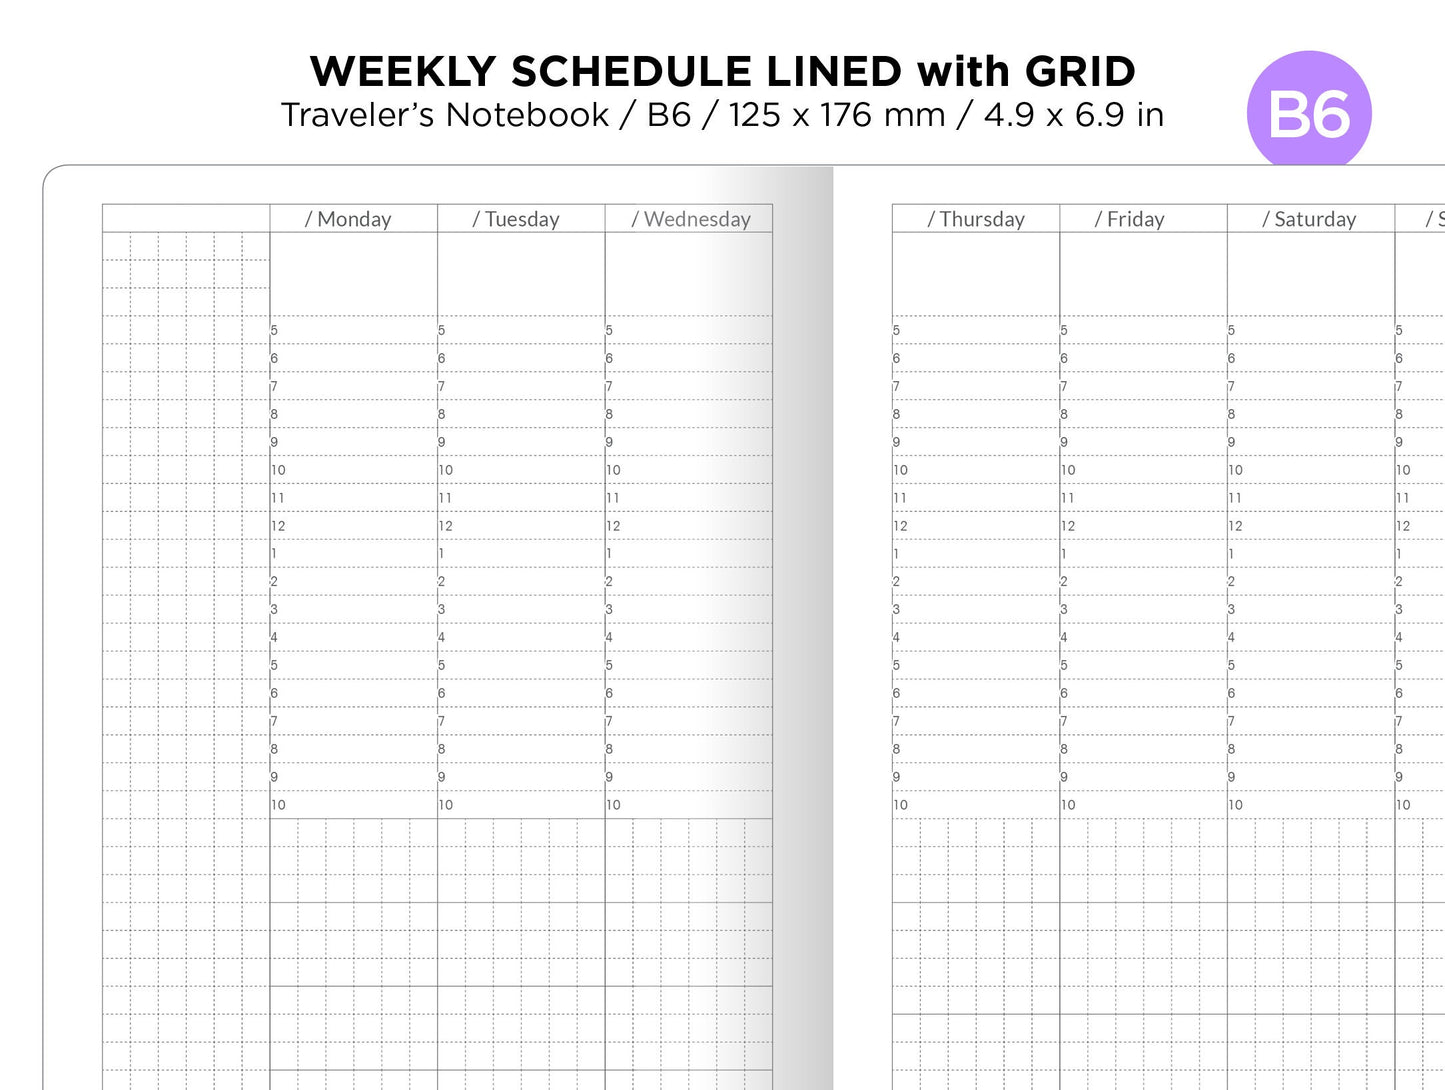 B6 Weekly Schedule Lined With GRID Printable Traveler's Notebook Insert Minimalist Functional